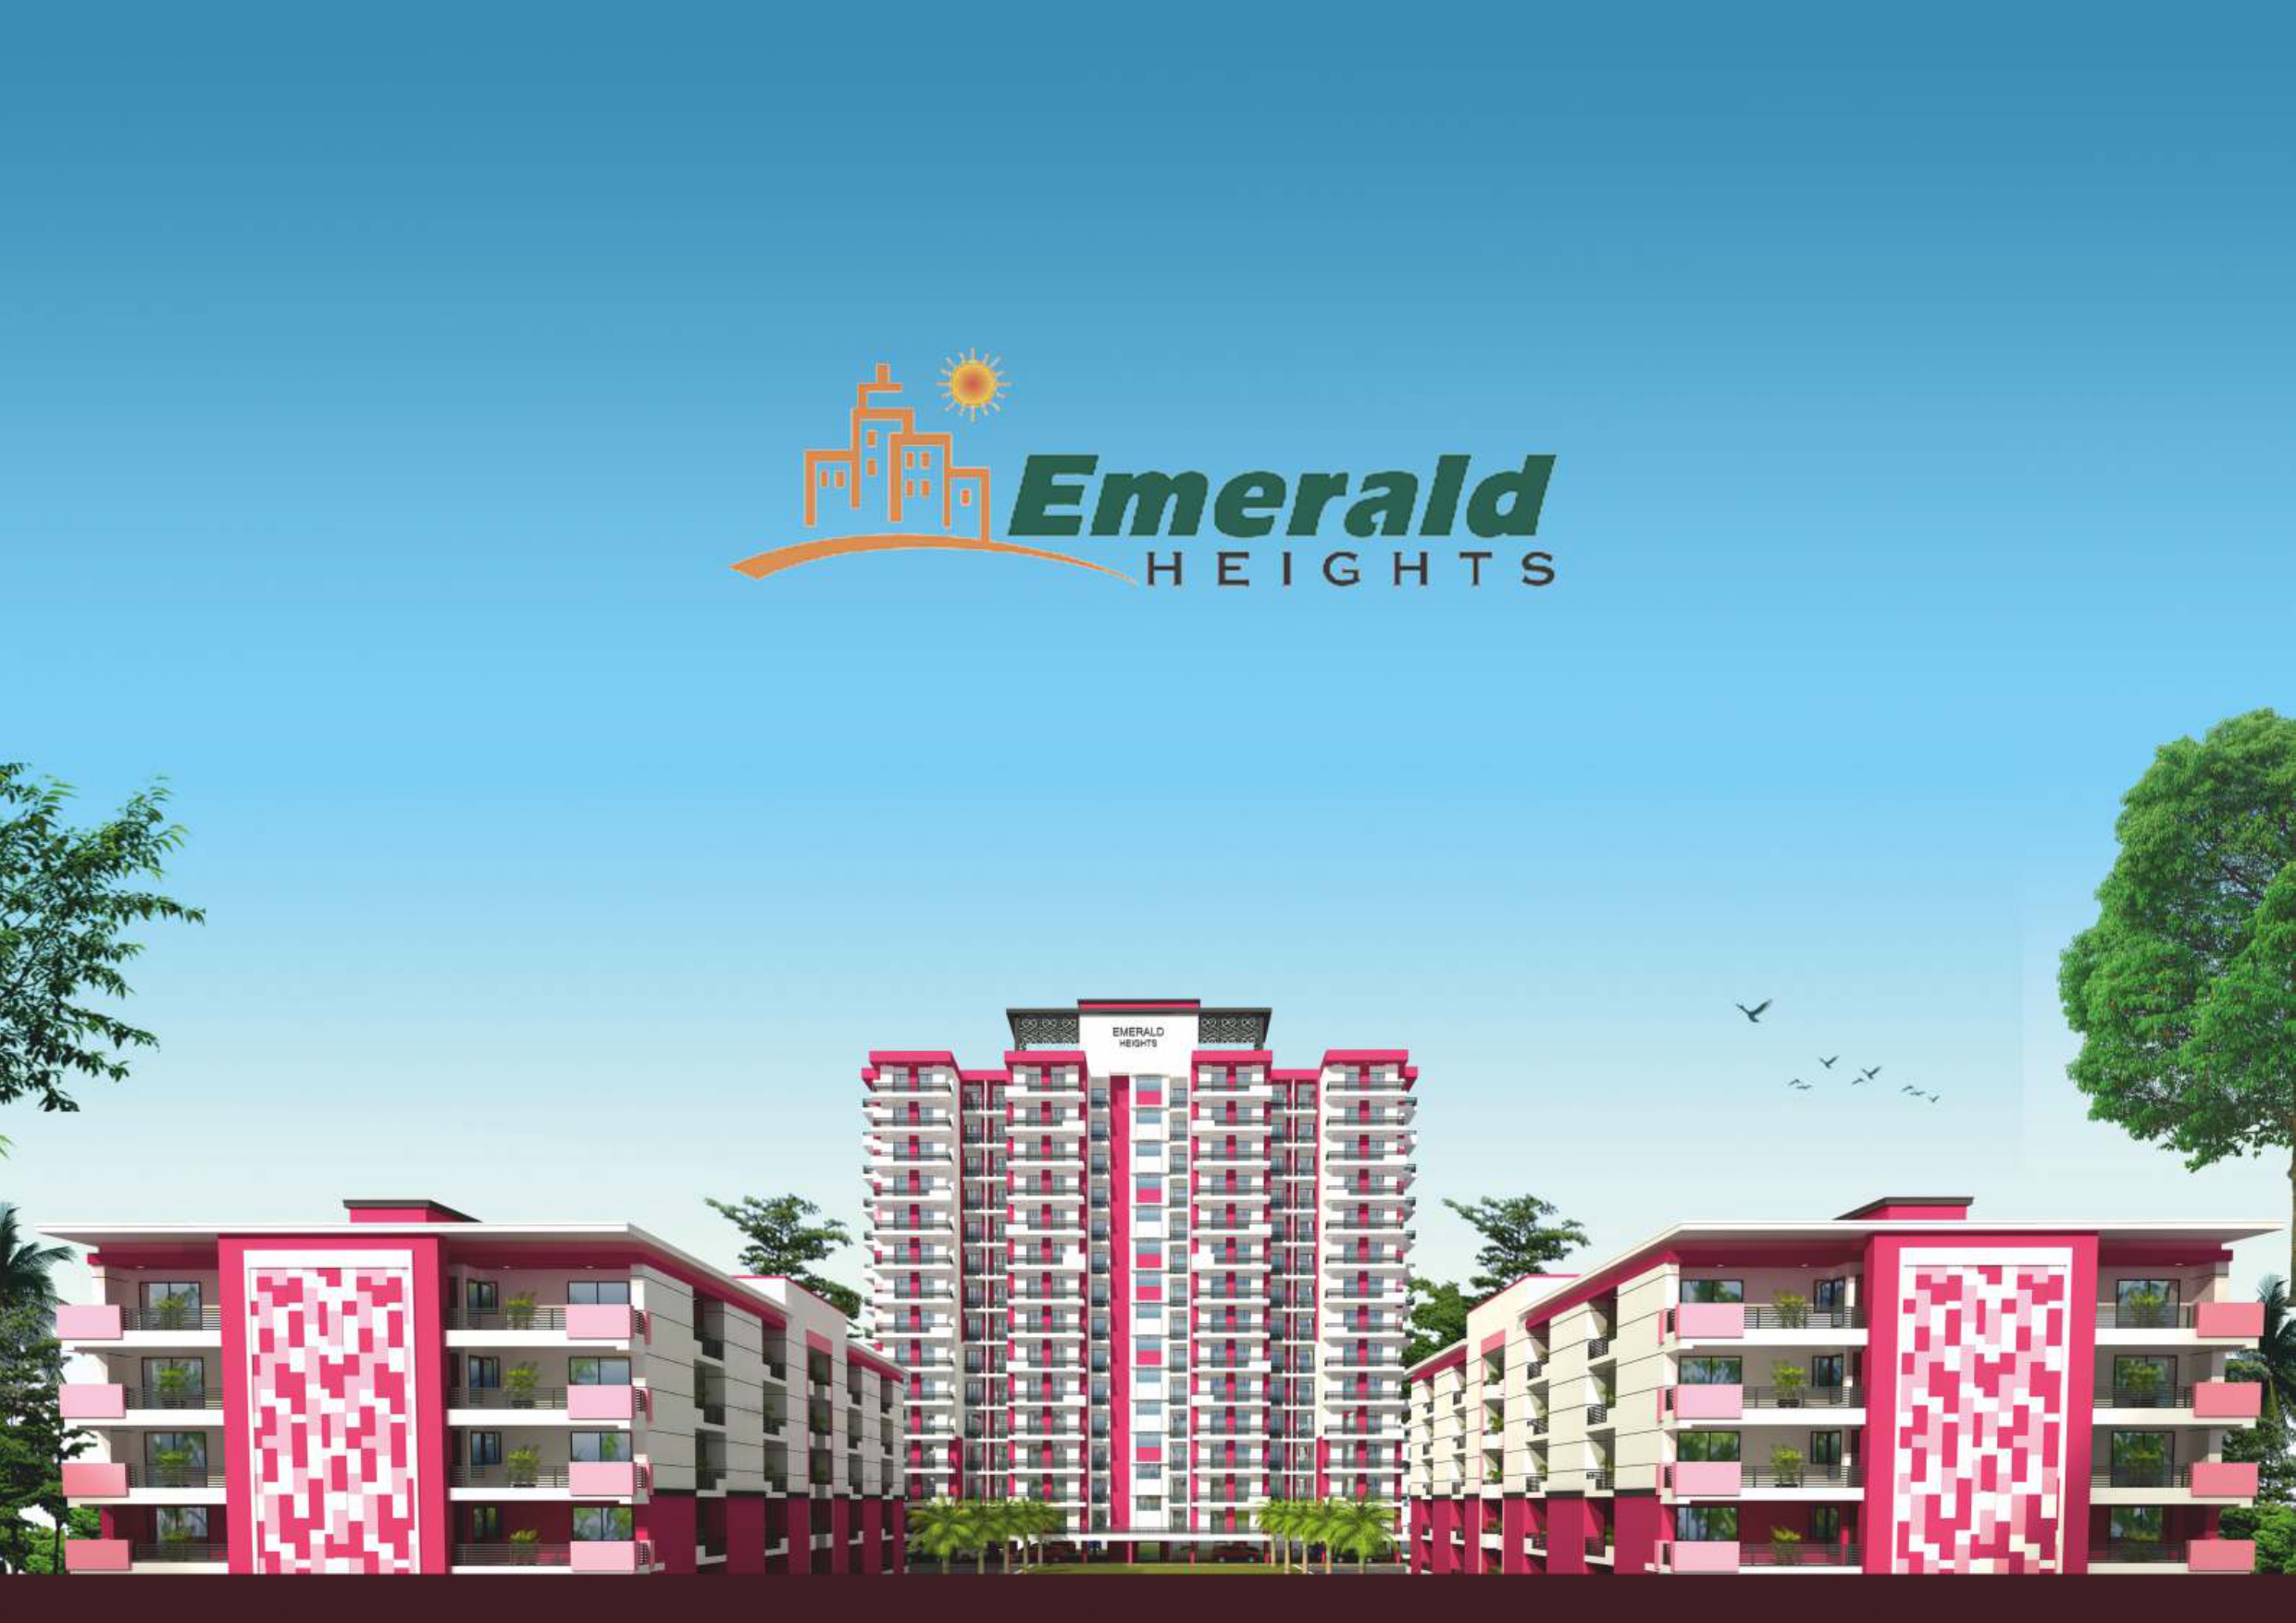 Emerald Heights Overview